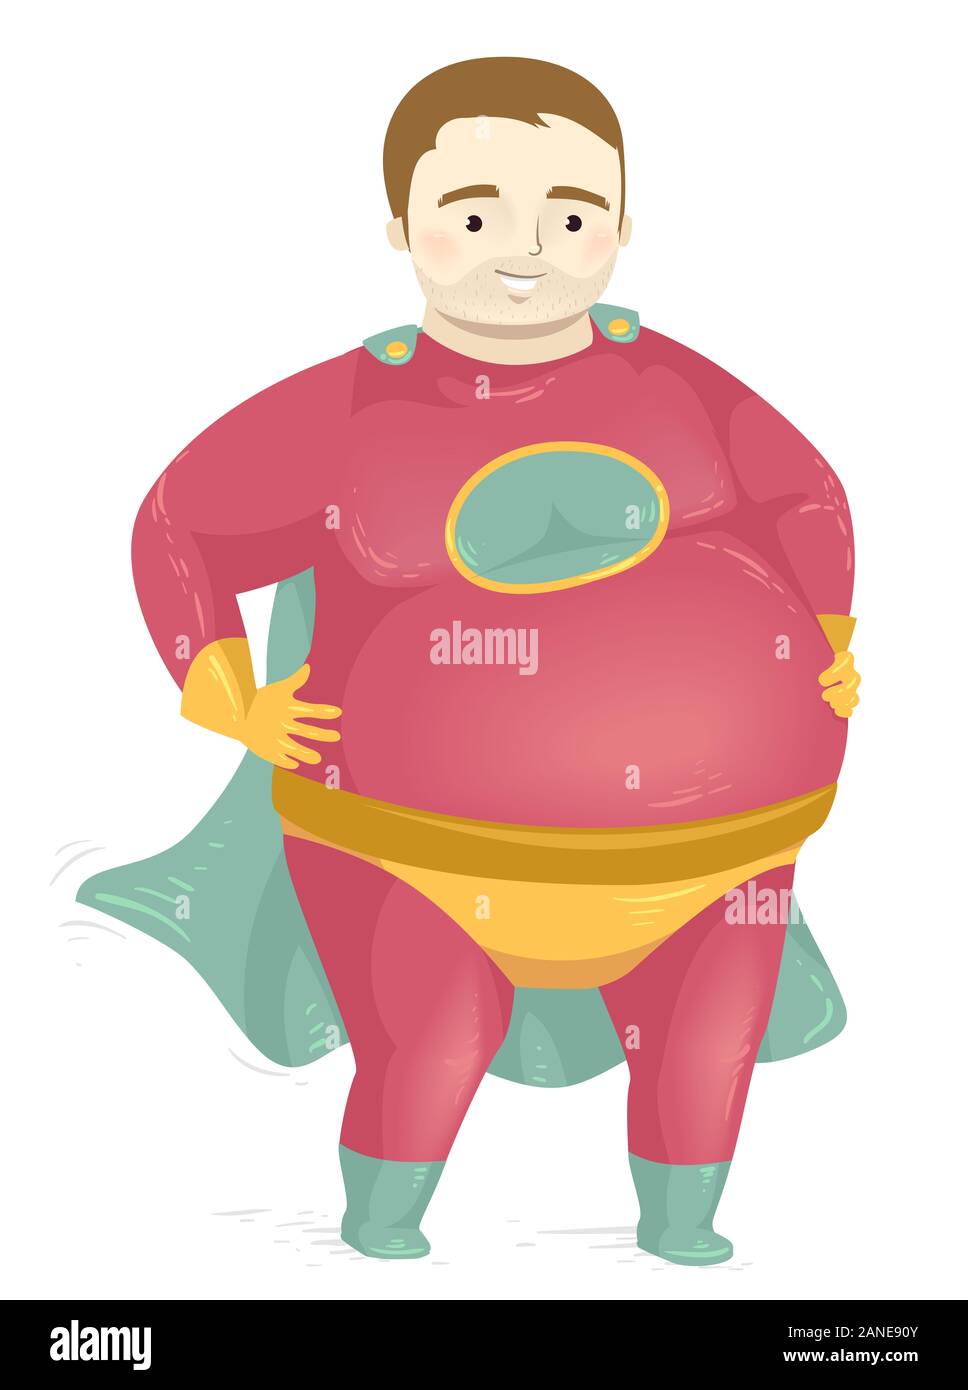 Illustration of a Fat Man Wearing Superhero Costume and Posing Stock Photo